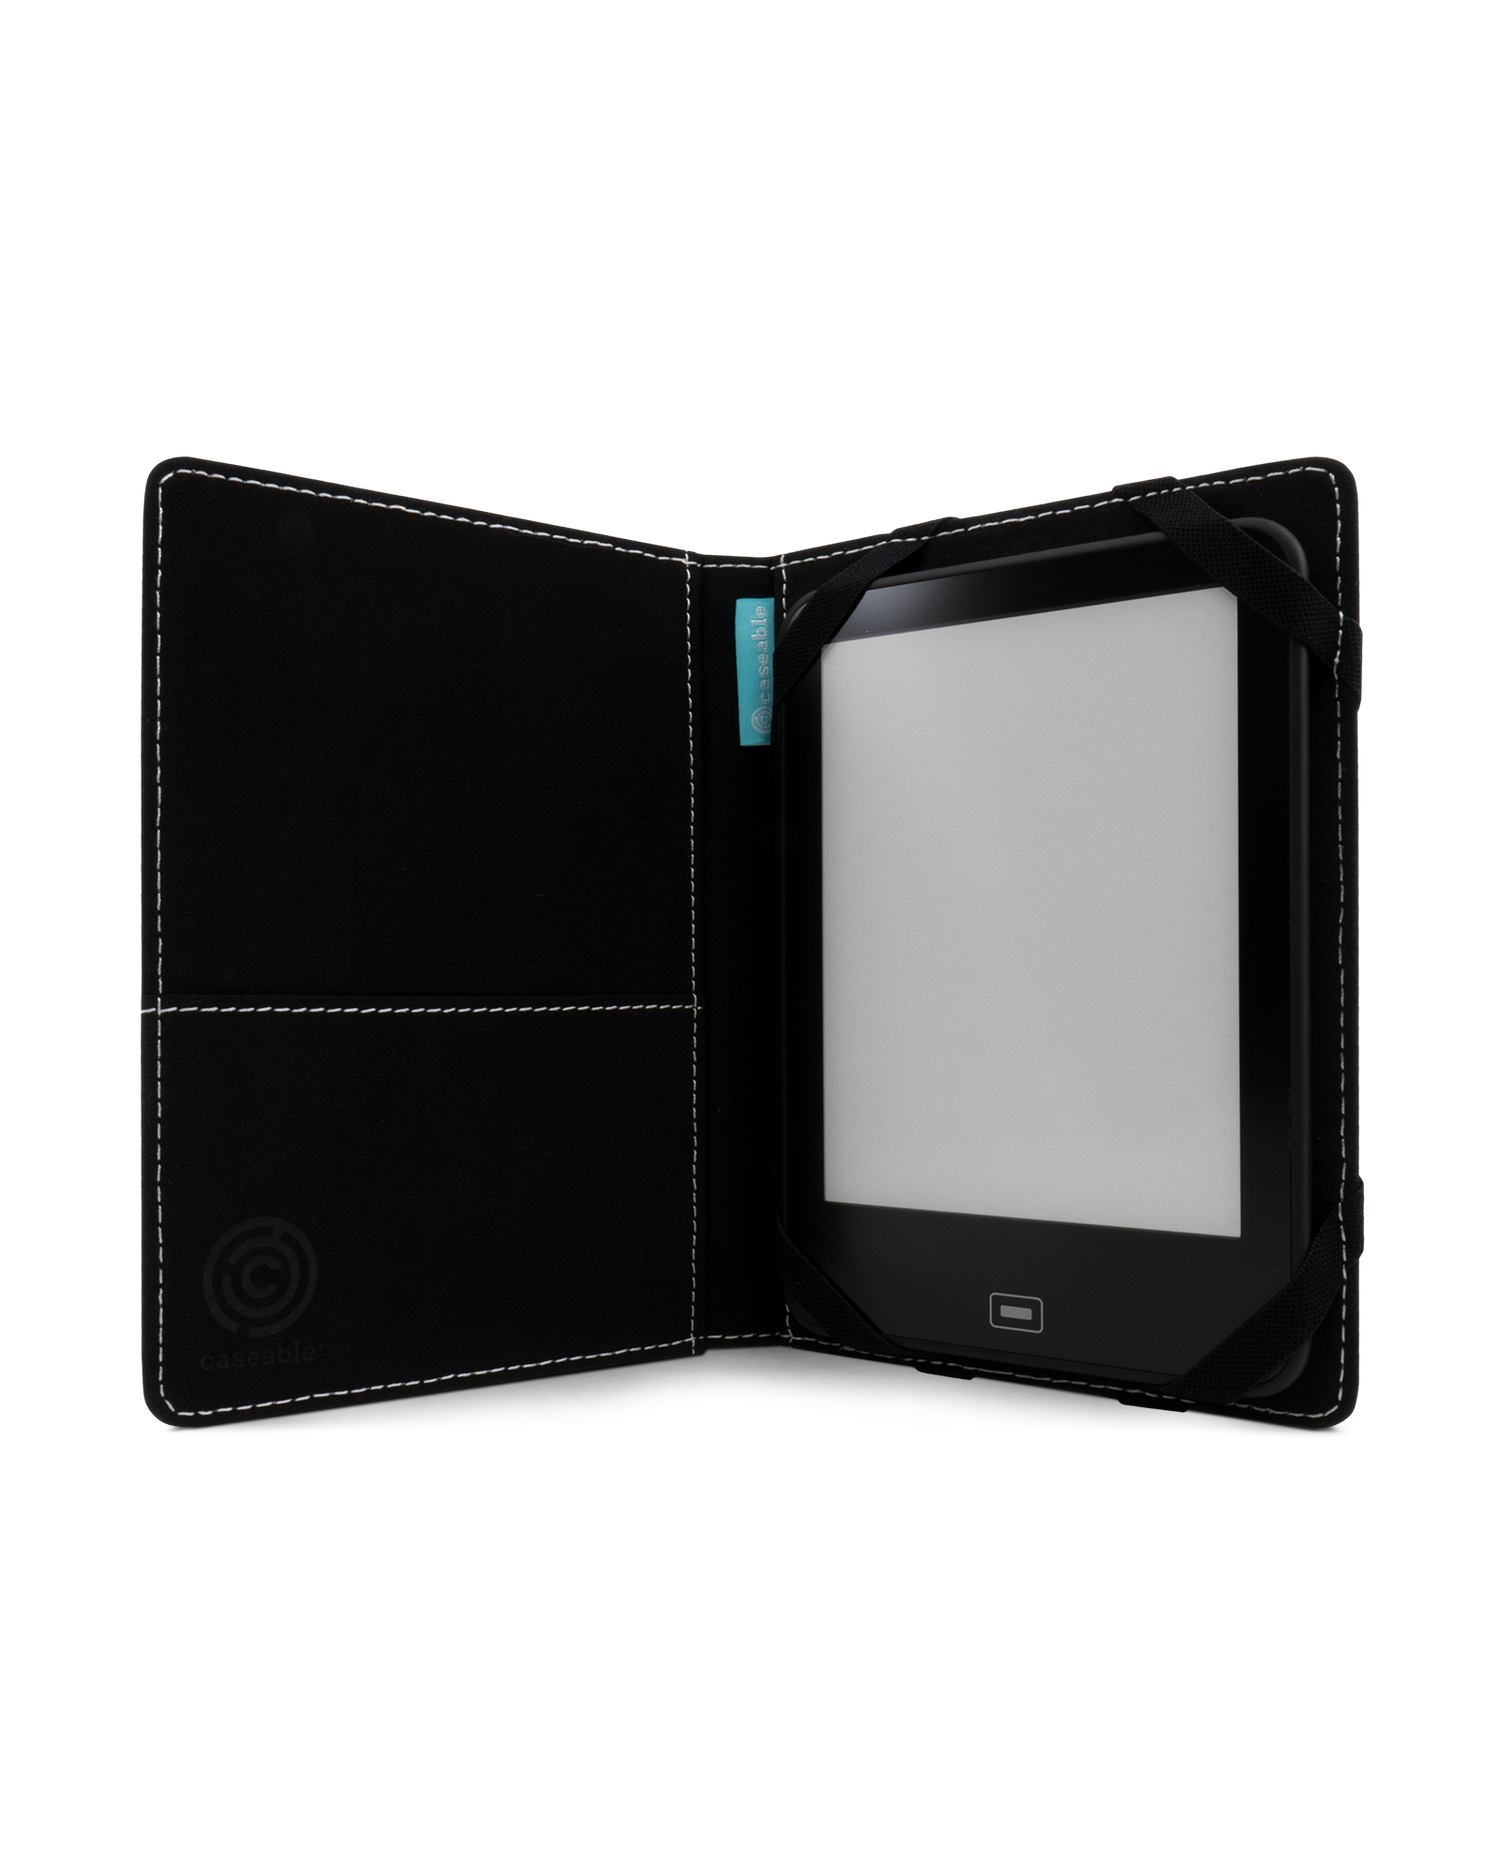 Forest eReader Case S: Opened interior view